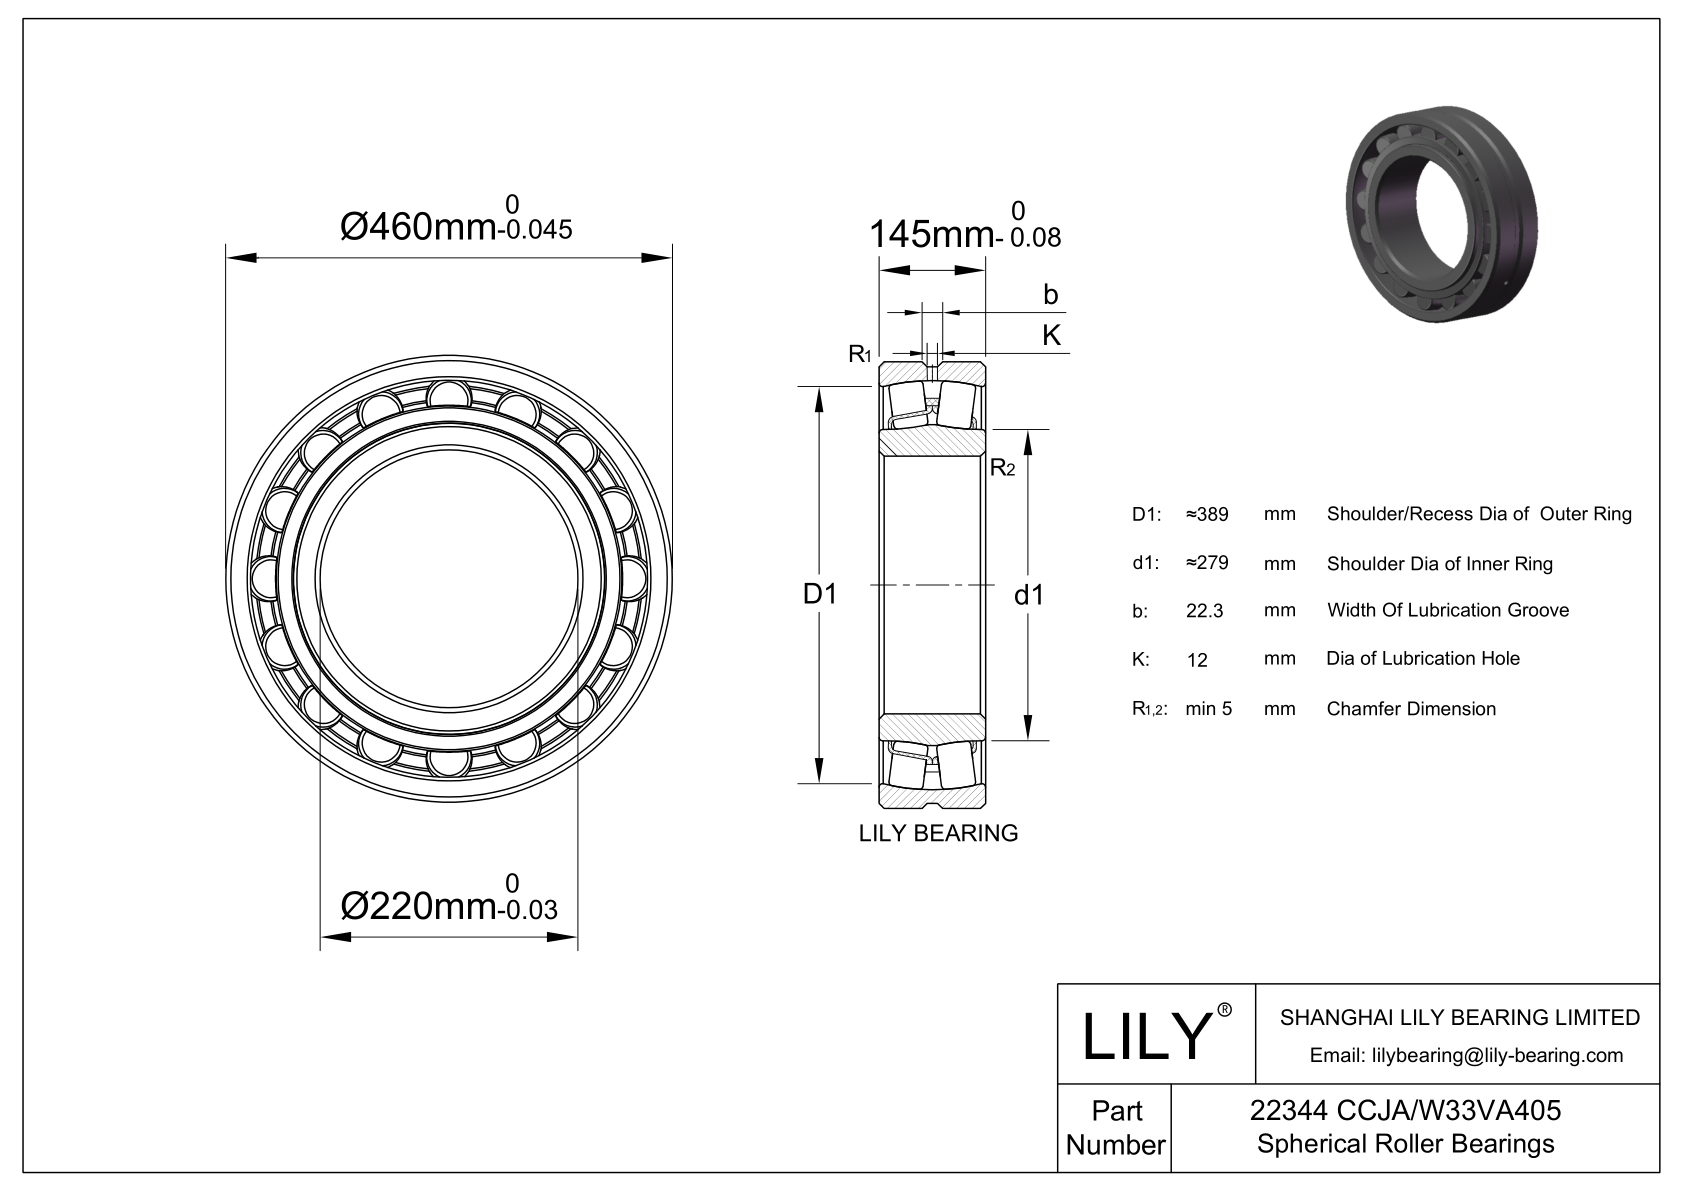 22344 CCJA/W33VA405 Double Row Spherical Roller Bearing cad drawing